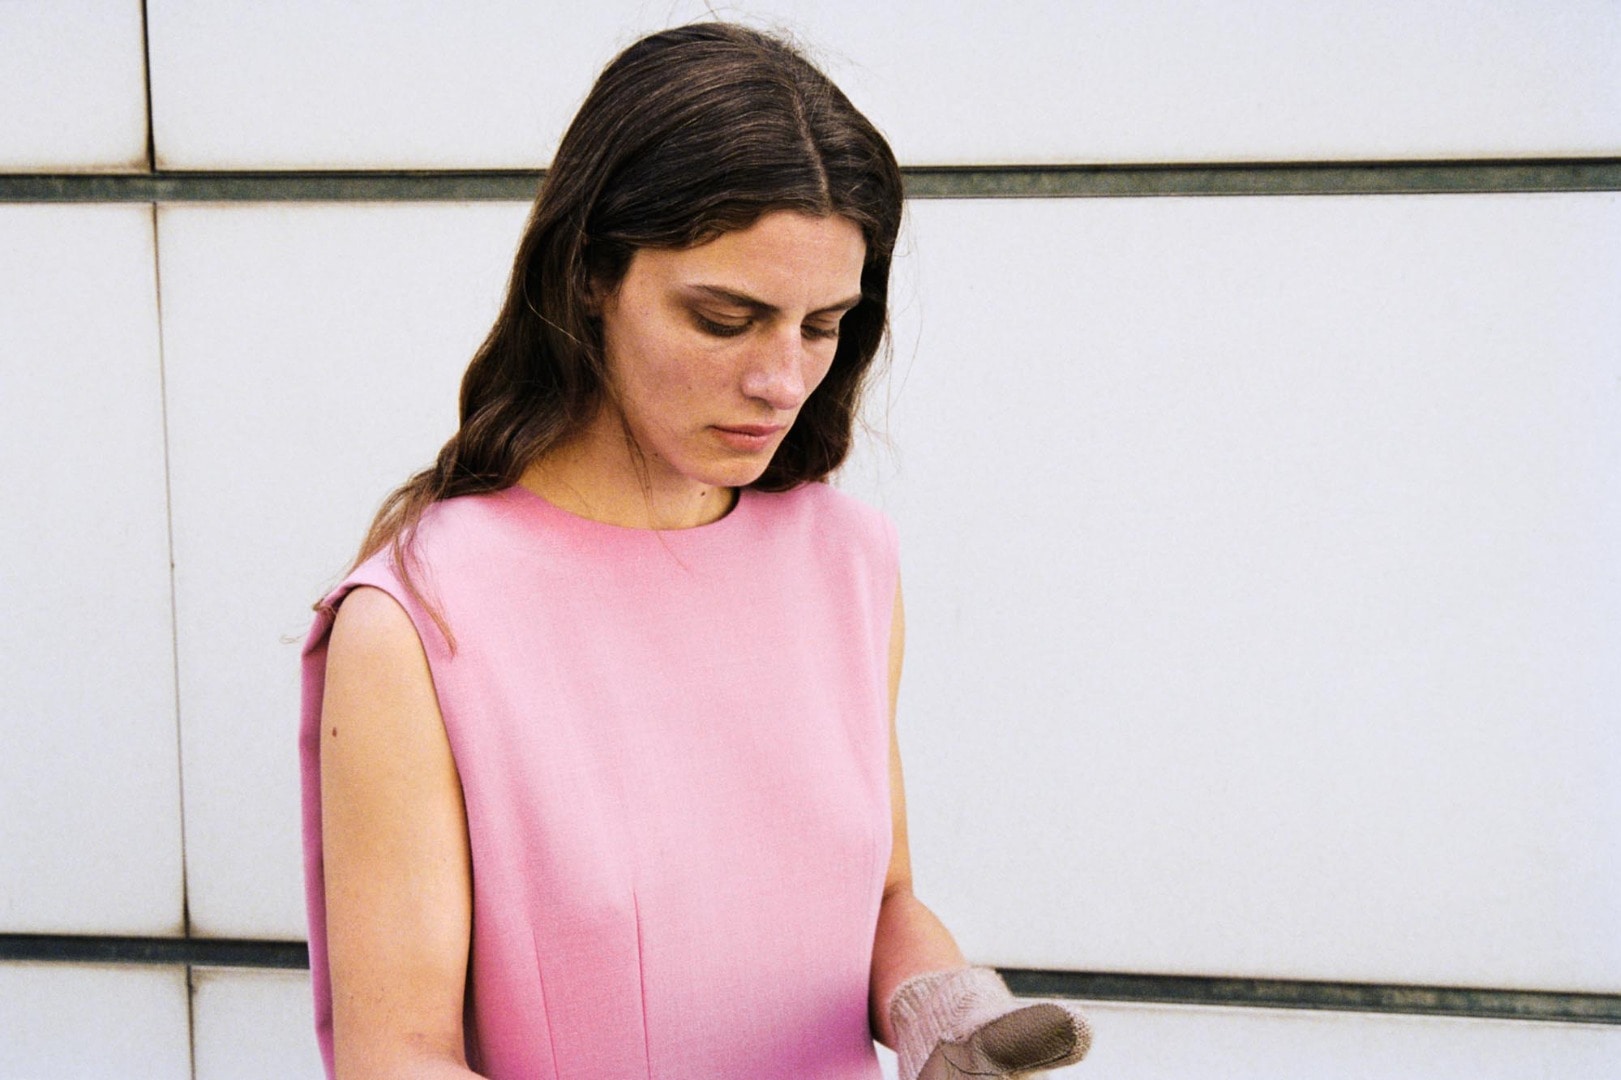 Marie wears Tense Wool Double Cloth Dress in Pink and Baby Cashmere Knit Leather Gloves in Natural Brown